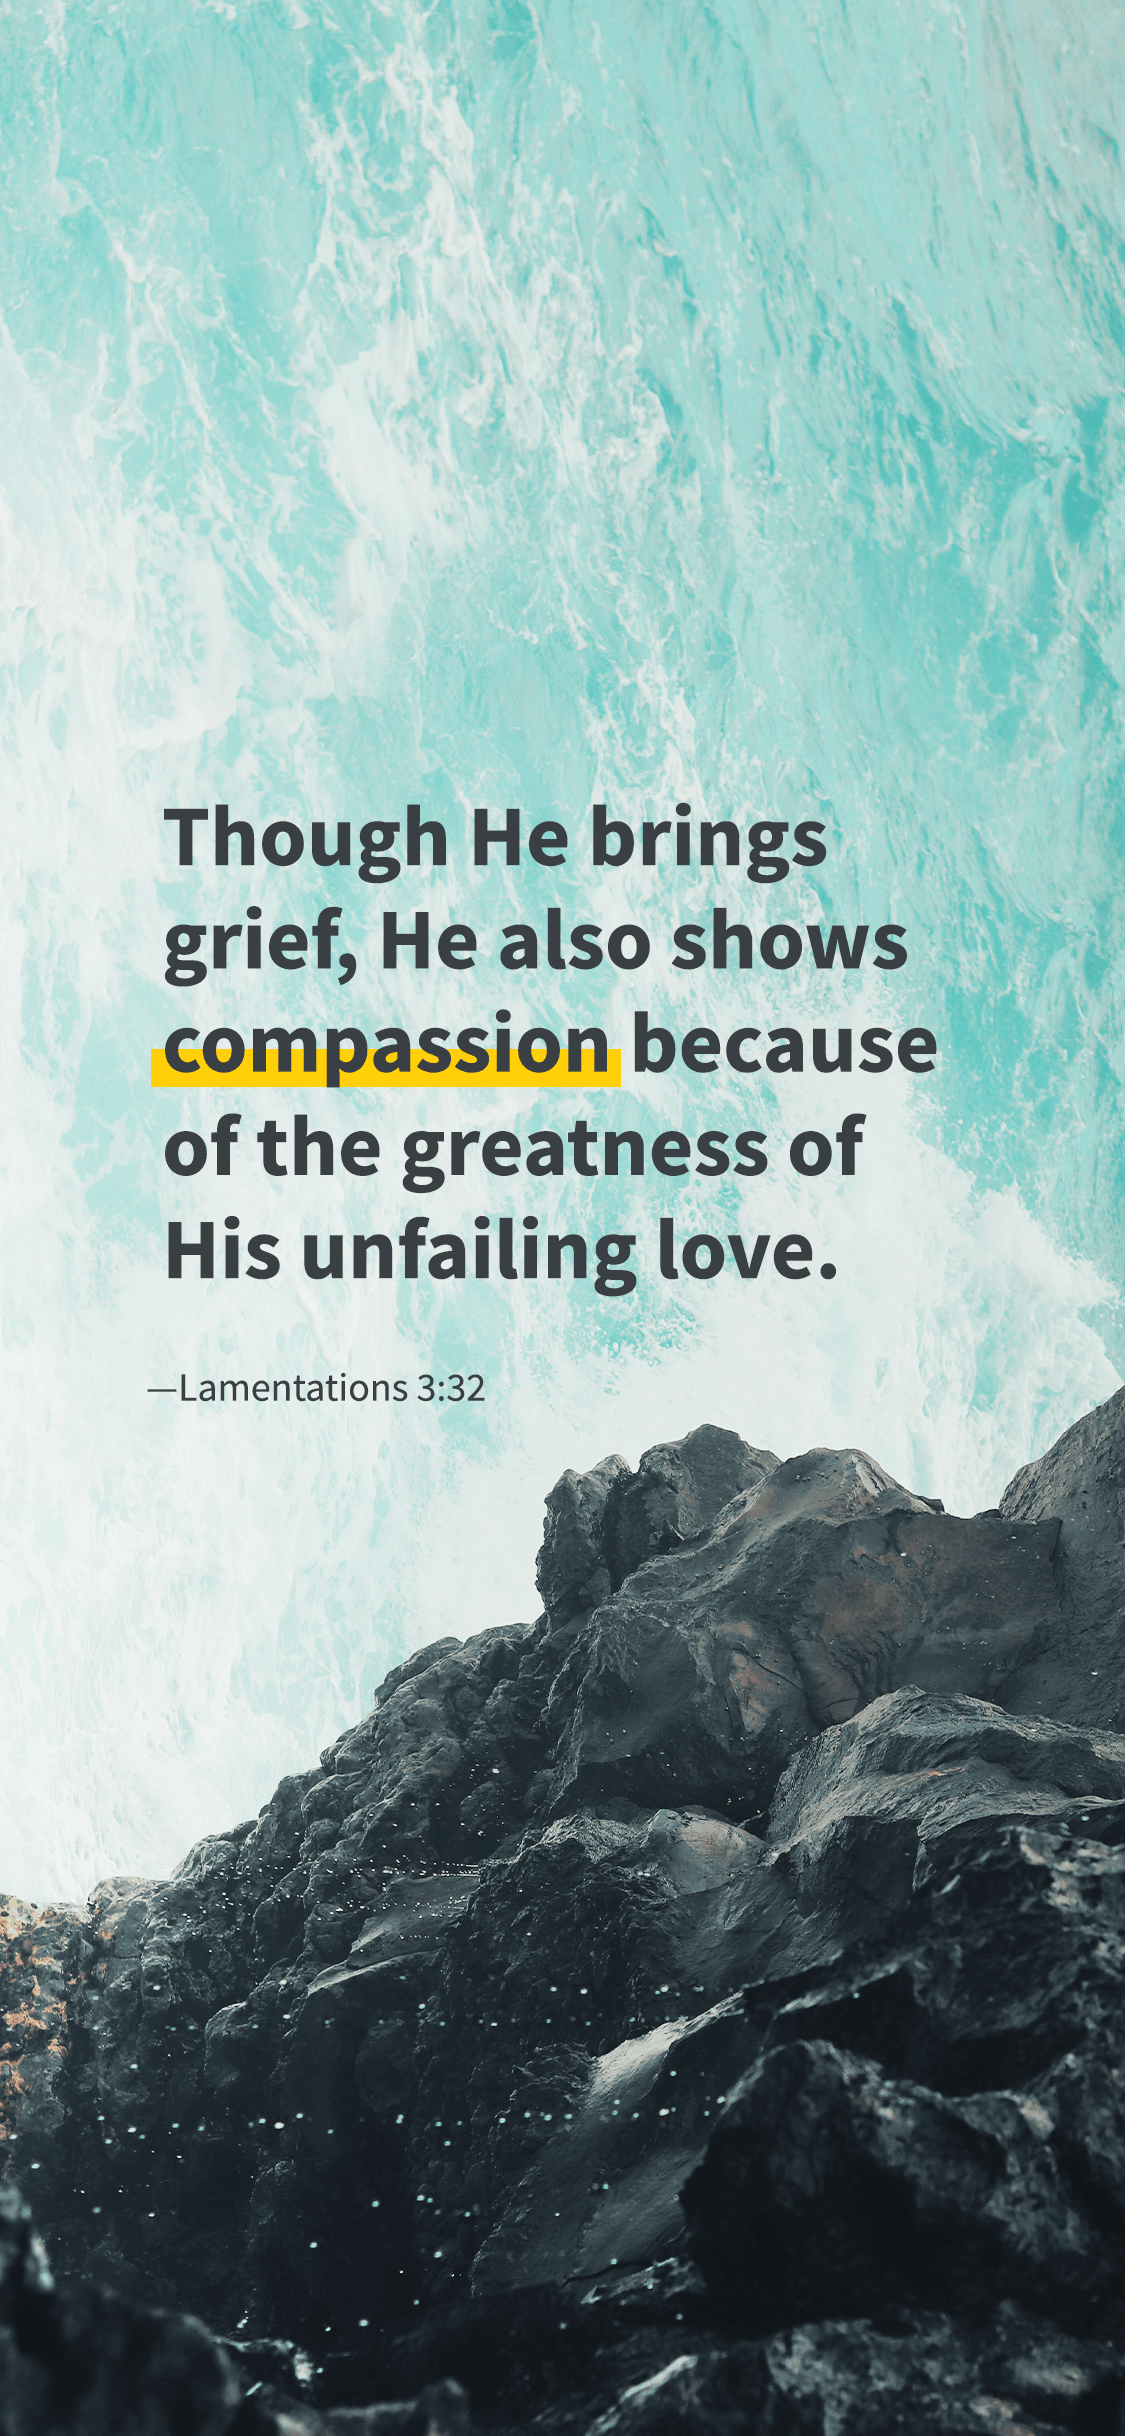 20 Inspiring Bible Verses About God's Amazing Love For You | Cru